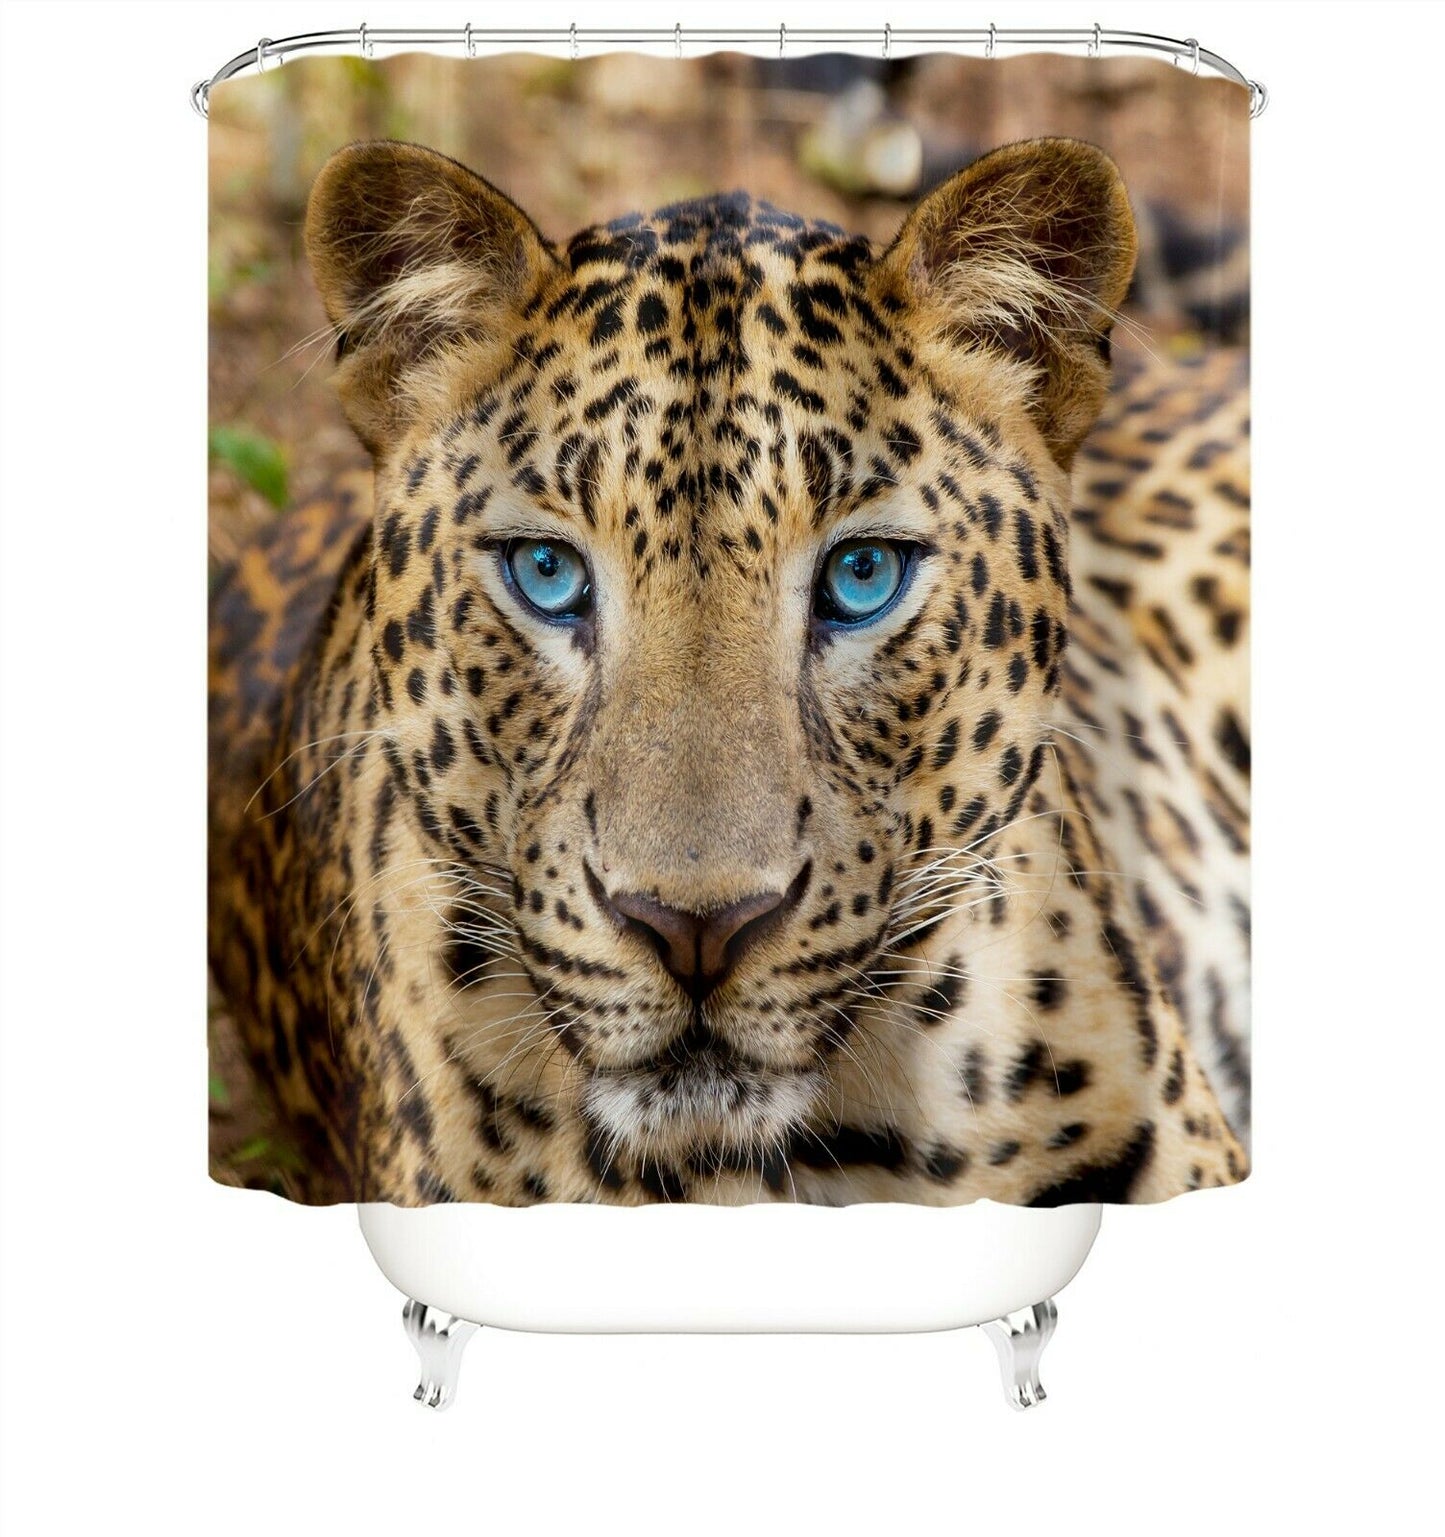 Leopard Shower Curtain Set Thick Bathroom Rug Bath Mat Non-Slip Toilet Lid Cover-180×180cm Shower Curtain Only-Free Shipping at meselling99